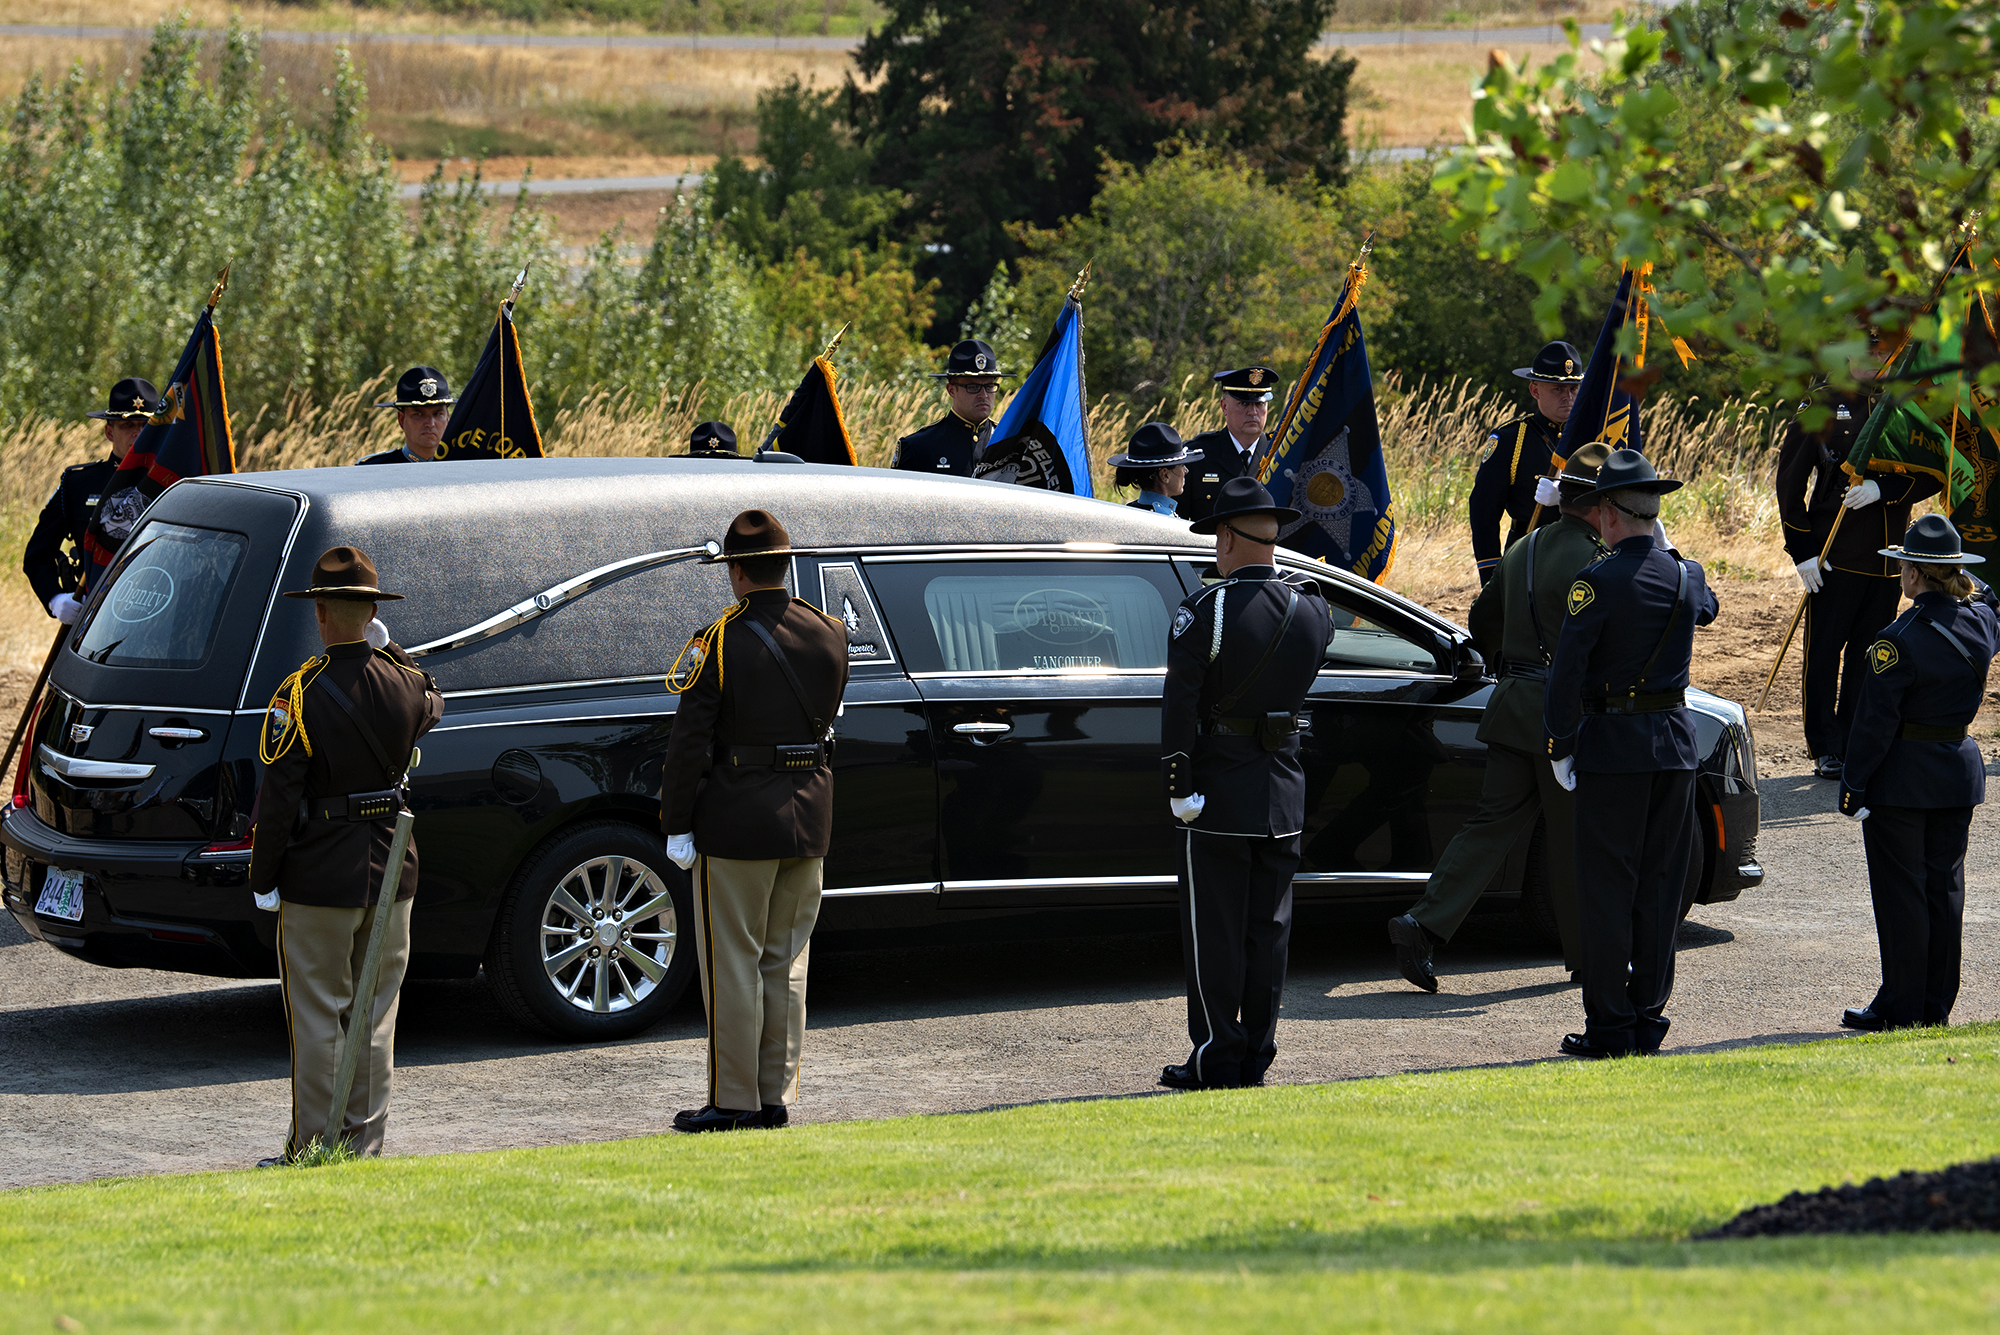 The body of Sgt. Jeremy Brown arrives at ilani casino as a multi-agency honor guard pays tribute Tuesday morning, Aug. 3, 2021.